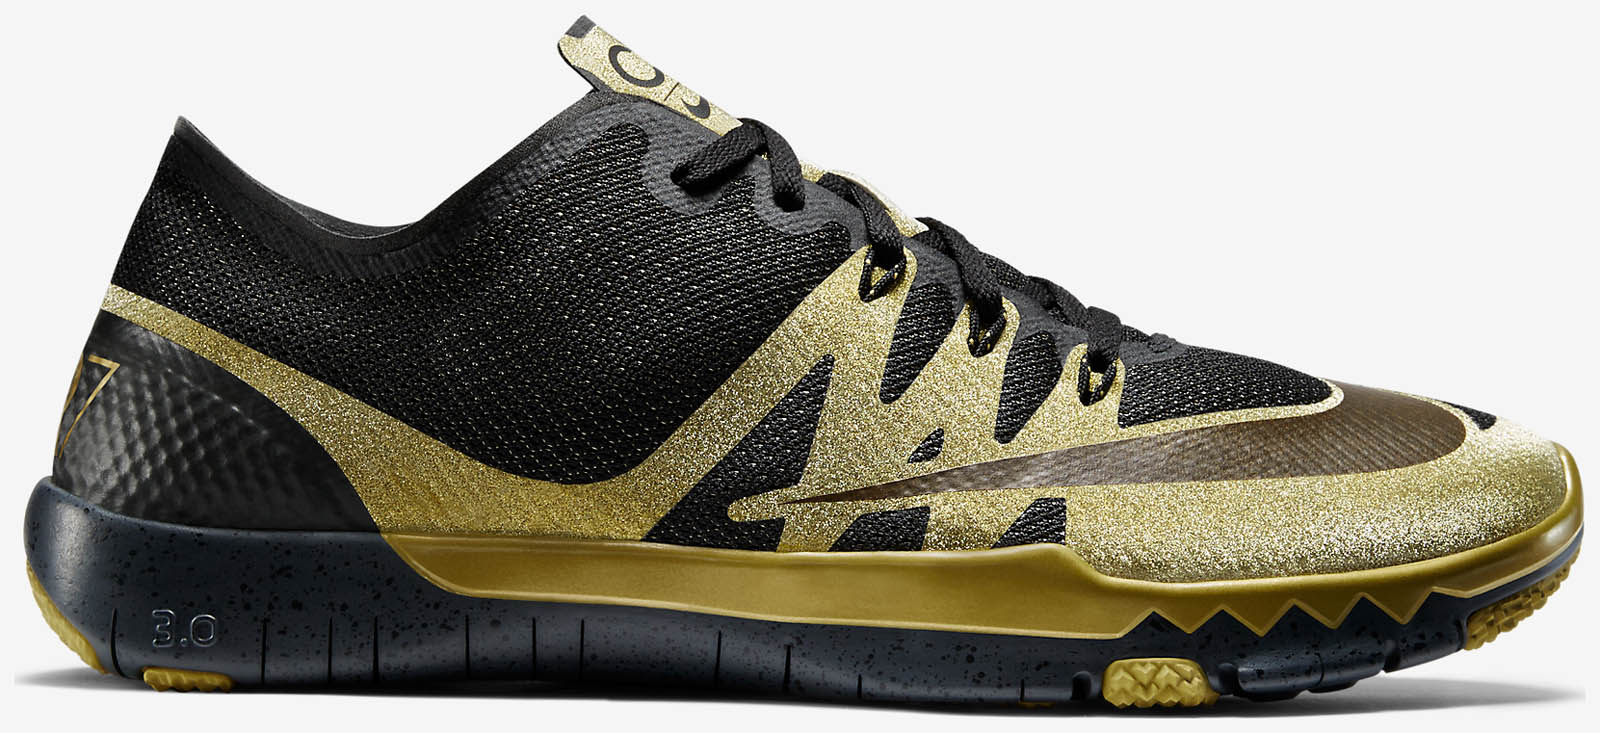 Black / Gold Nike Free Trainer Cristiano Ronaldo Shoes Released - Footy